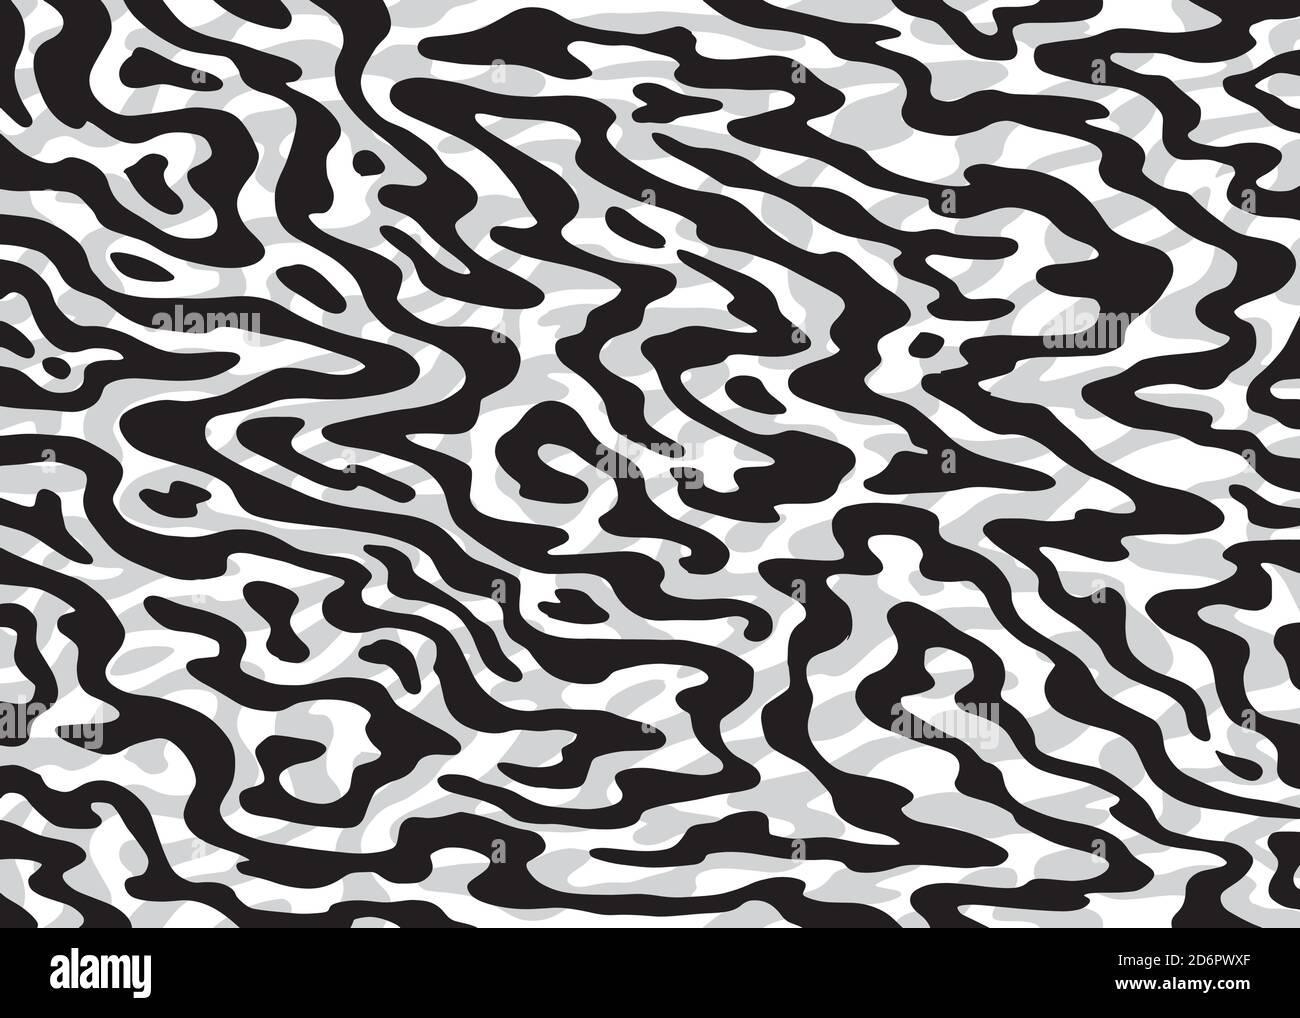 Psychedelic Abstract Background. Black and white pattern. Vector illustration for surface design, print, poster, icon, web, graphic designs. Stock Vector